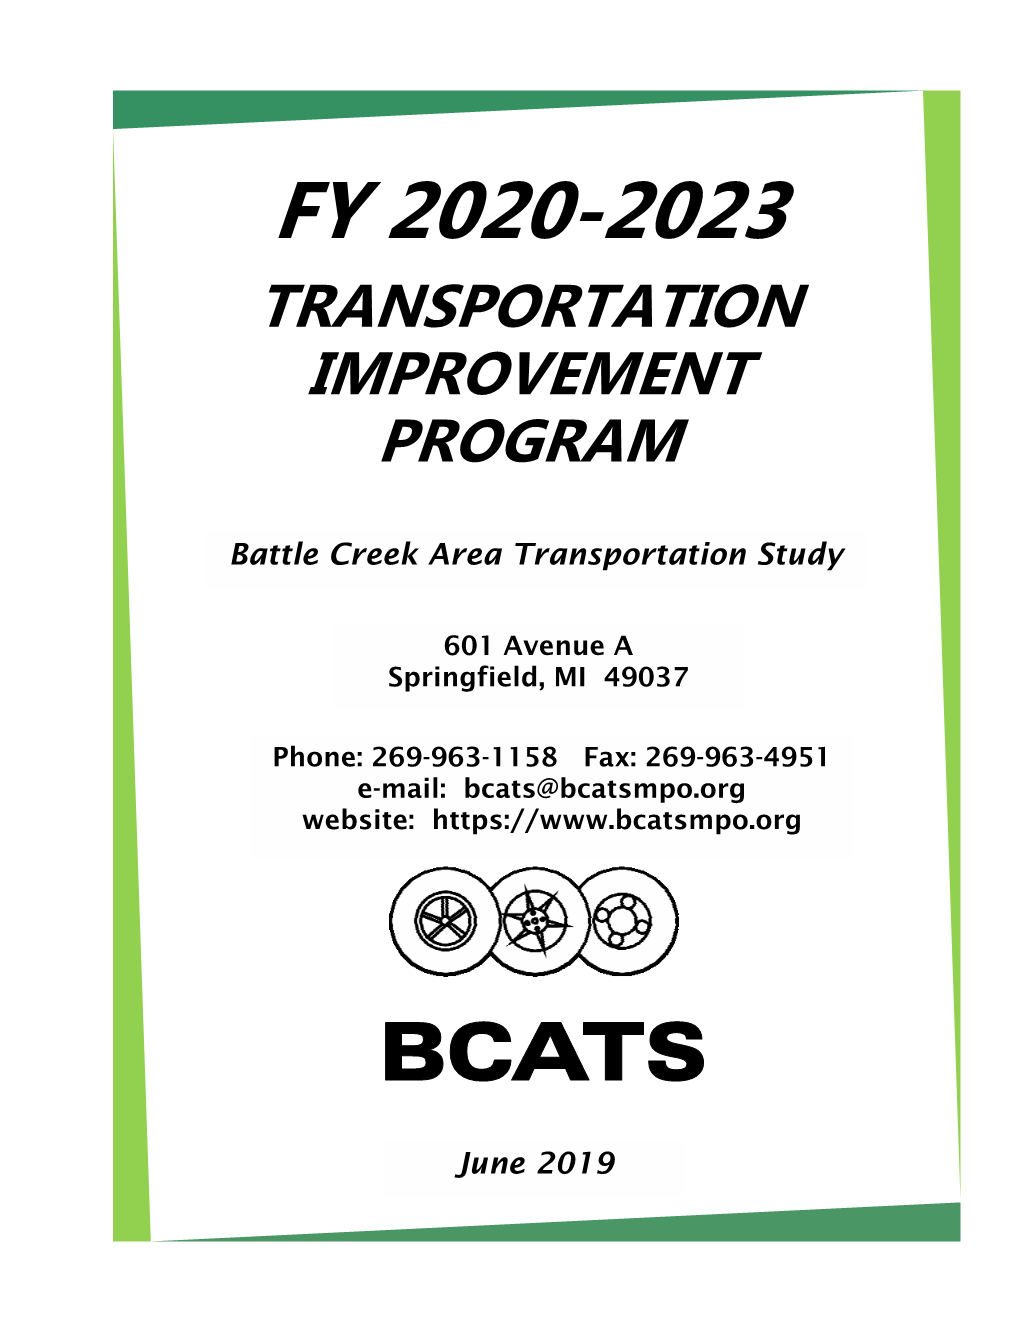 FY 2020-2023 Transportation Improvement Program (TIP) in January, 2019 and April, 2019 to the Following Consultation Agencies*